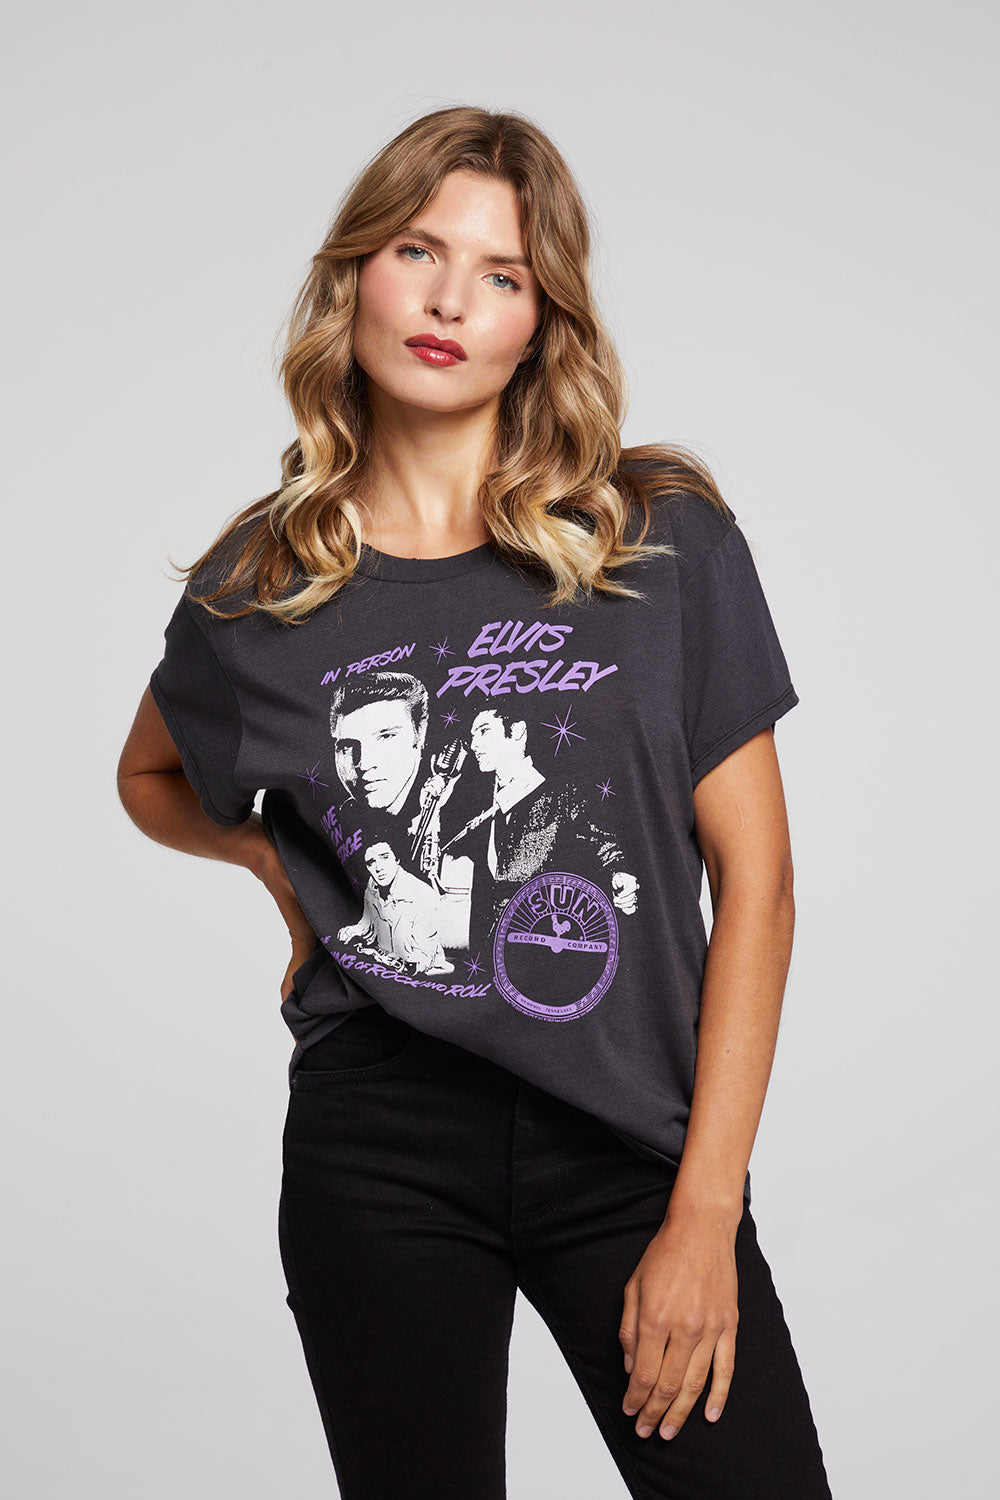 Sun Records The King Live Tee WOMENS chaserbrand